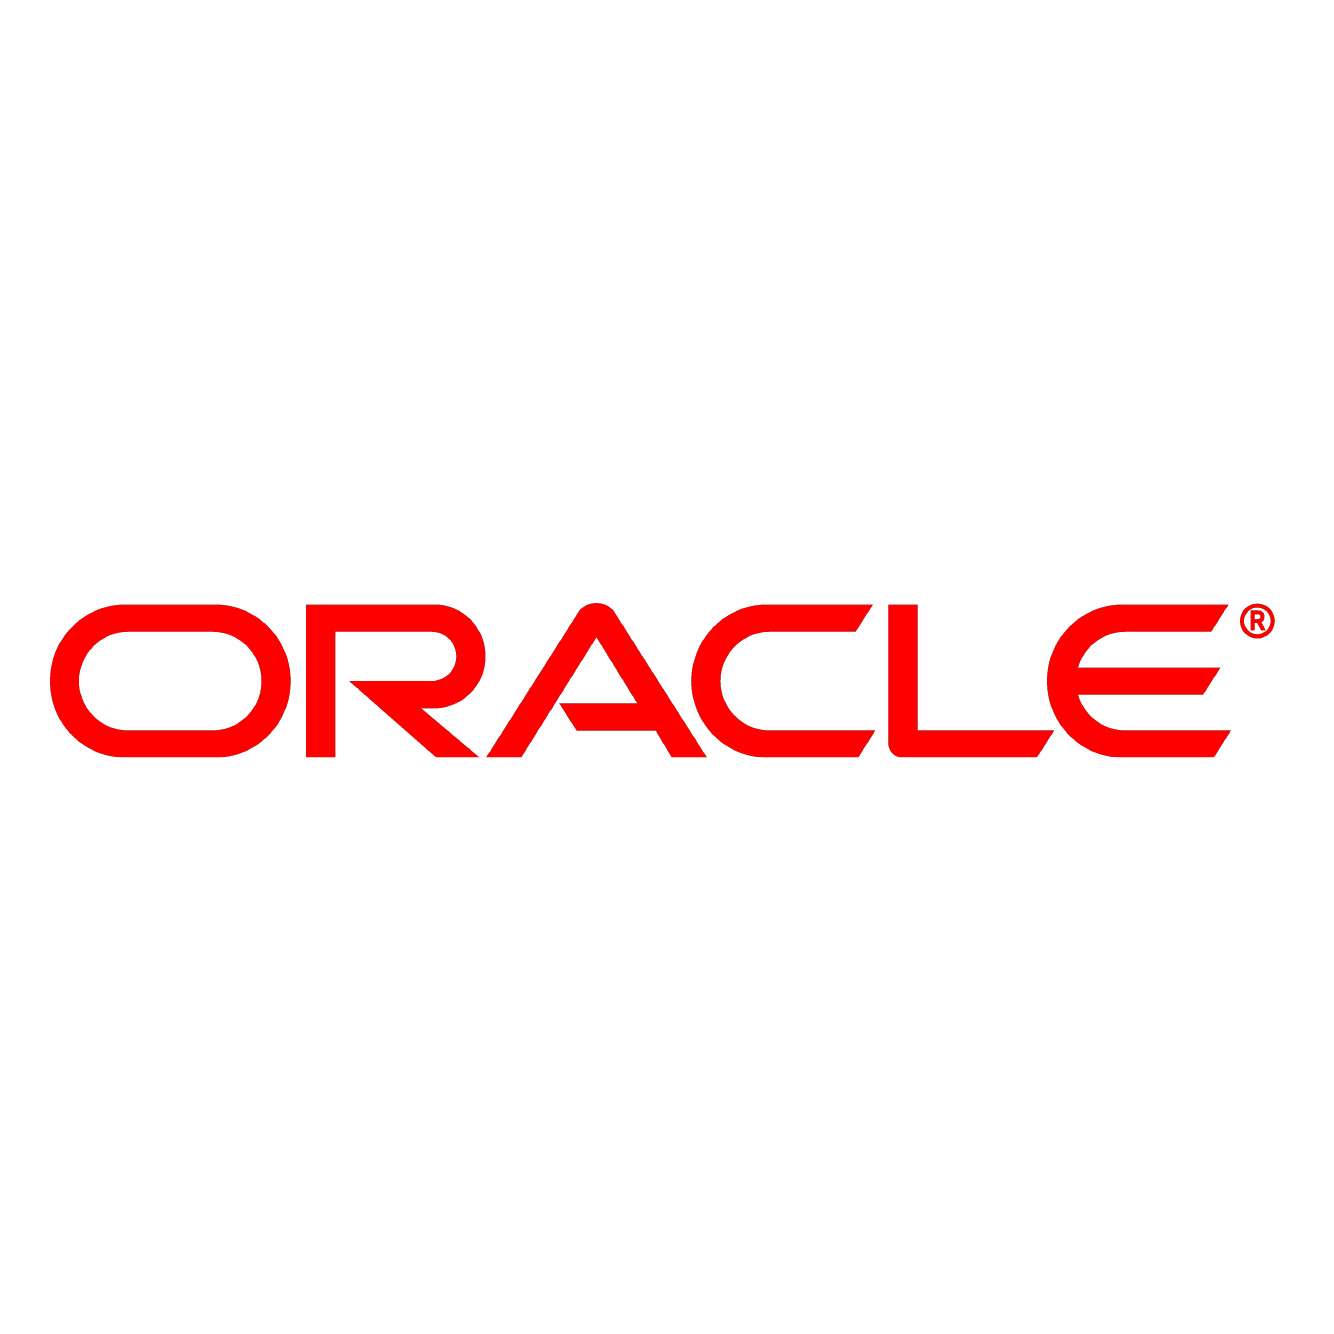 https://securetech.local/wp-content/uploads/2019/02/19.ORACLE.png